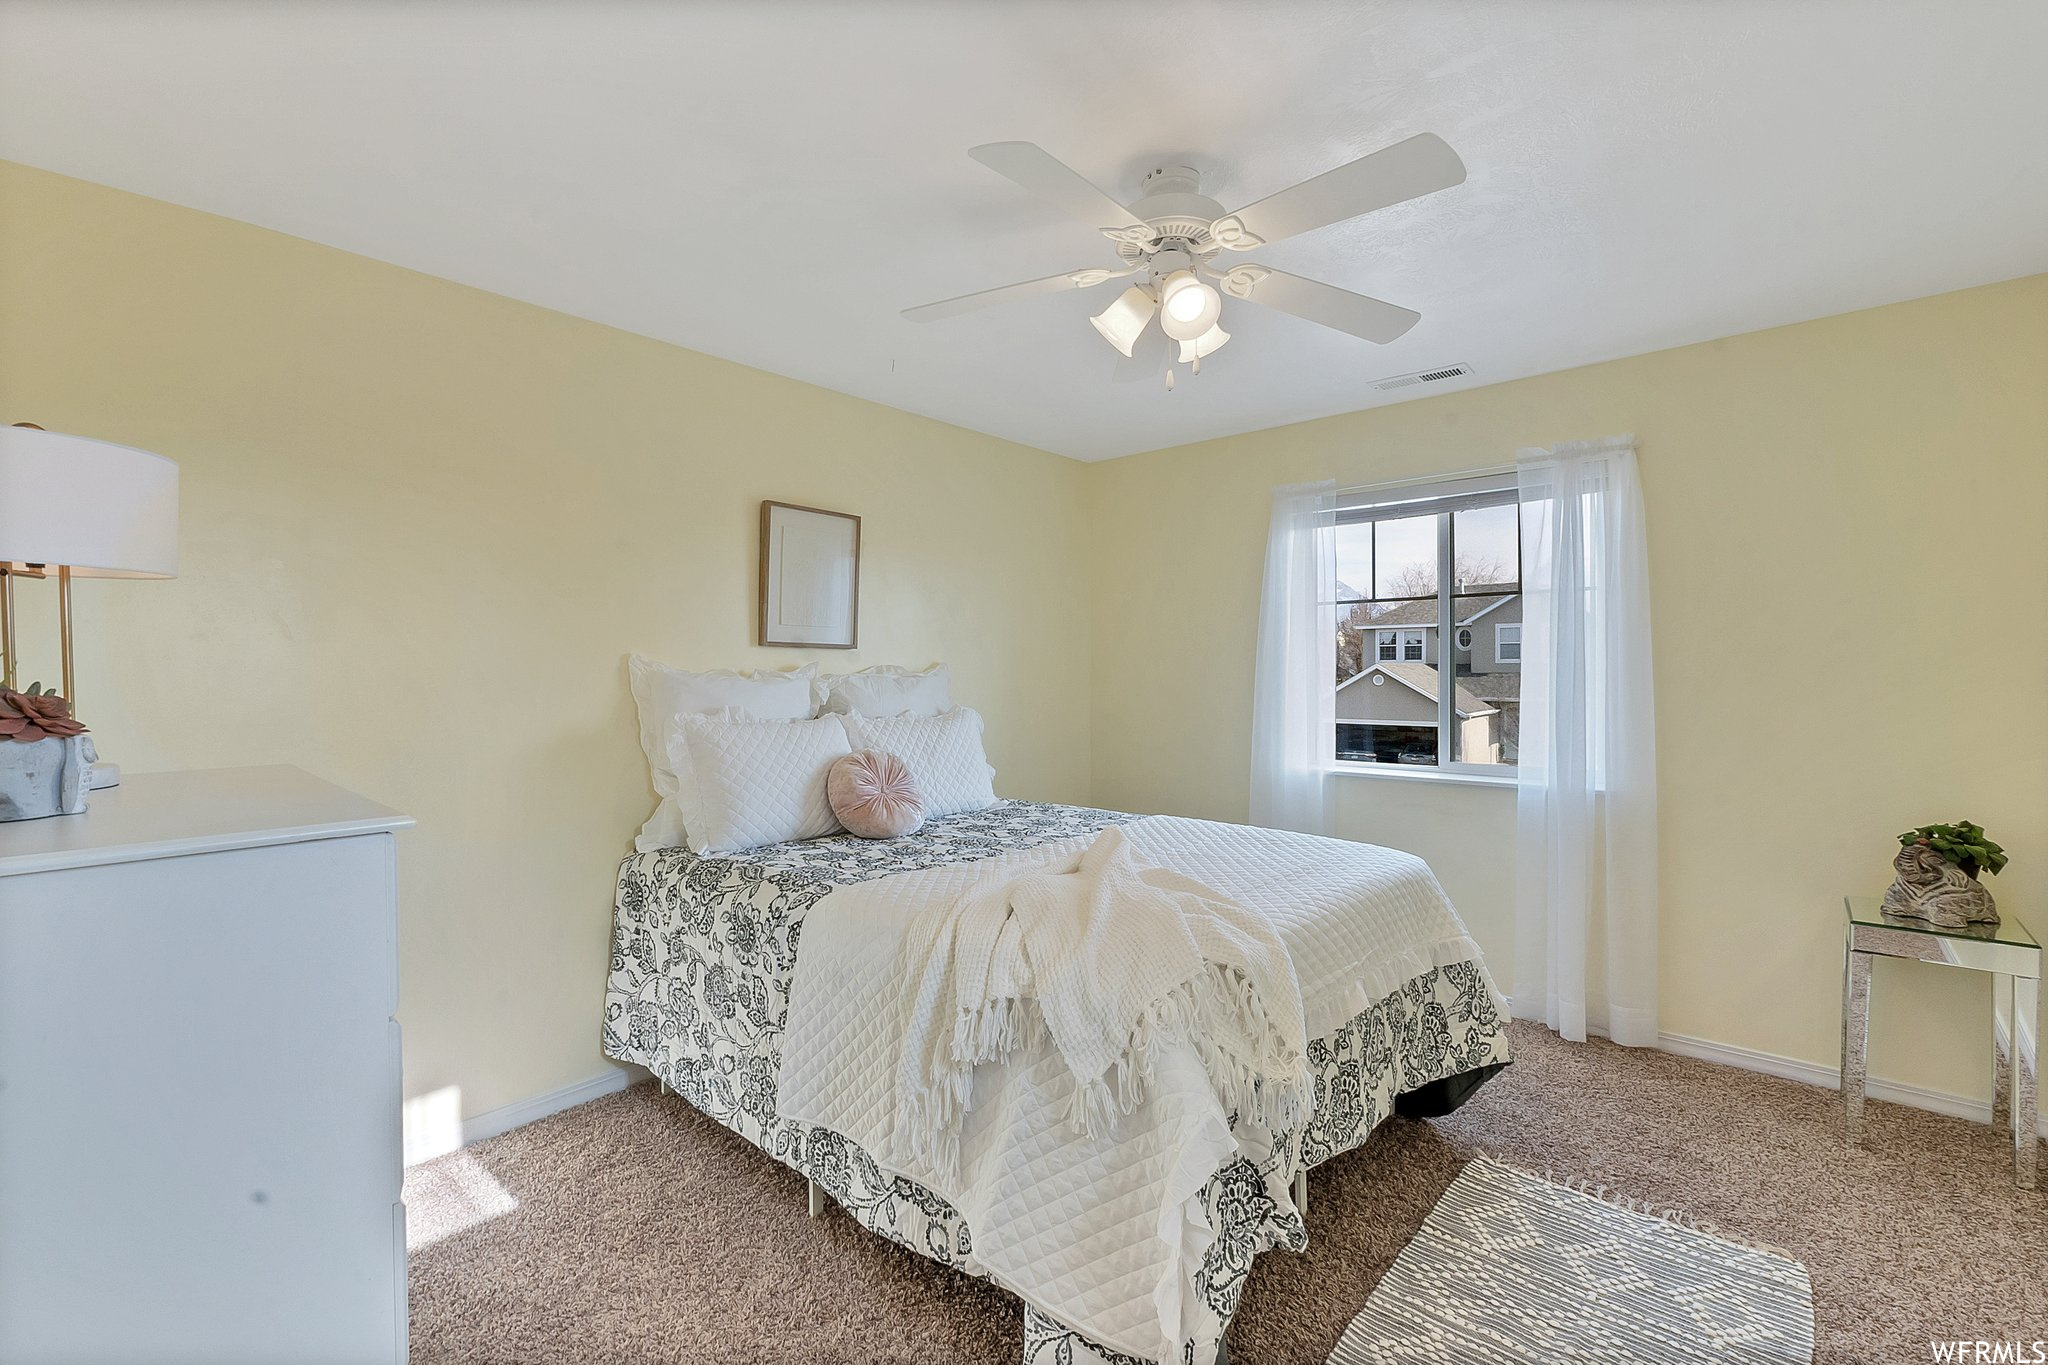 Bedroom with beautiful view of mountains, ceiling fan, extra large closet and built in desk.